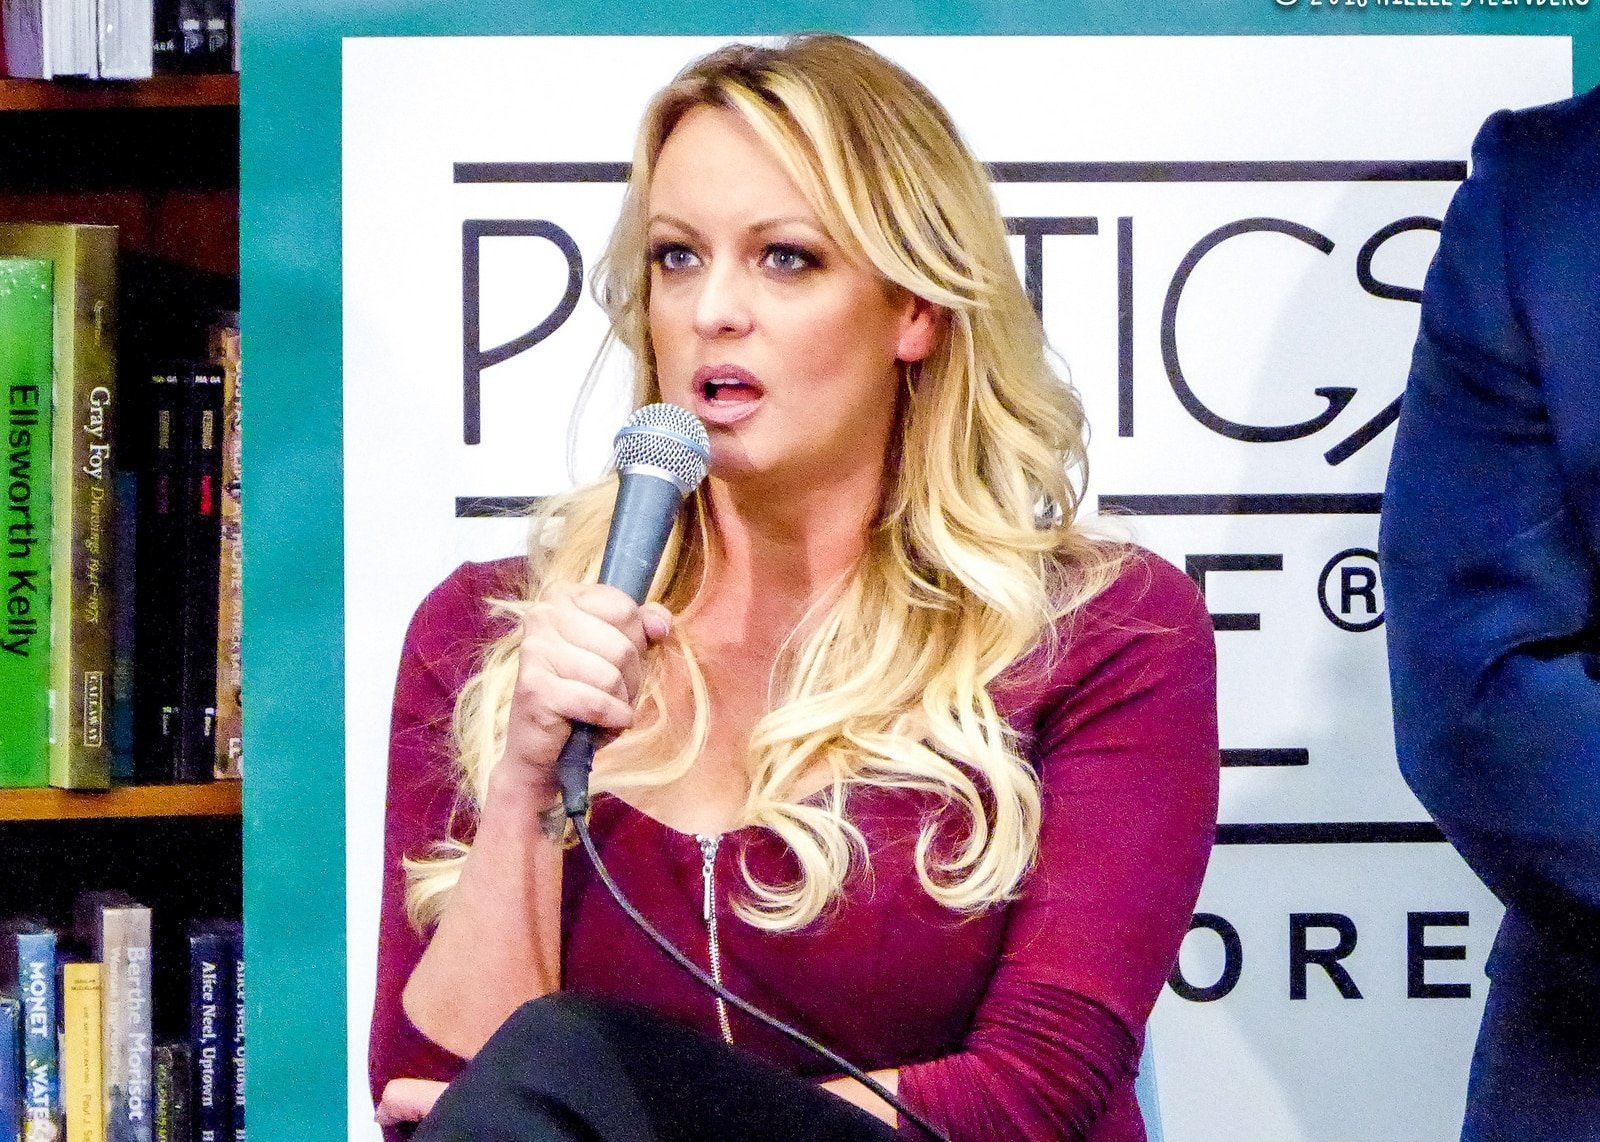 Stormy Daniels was ordered to pay $293 thousand to Donald Trump